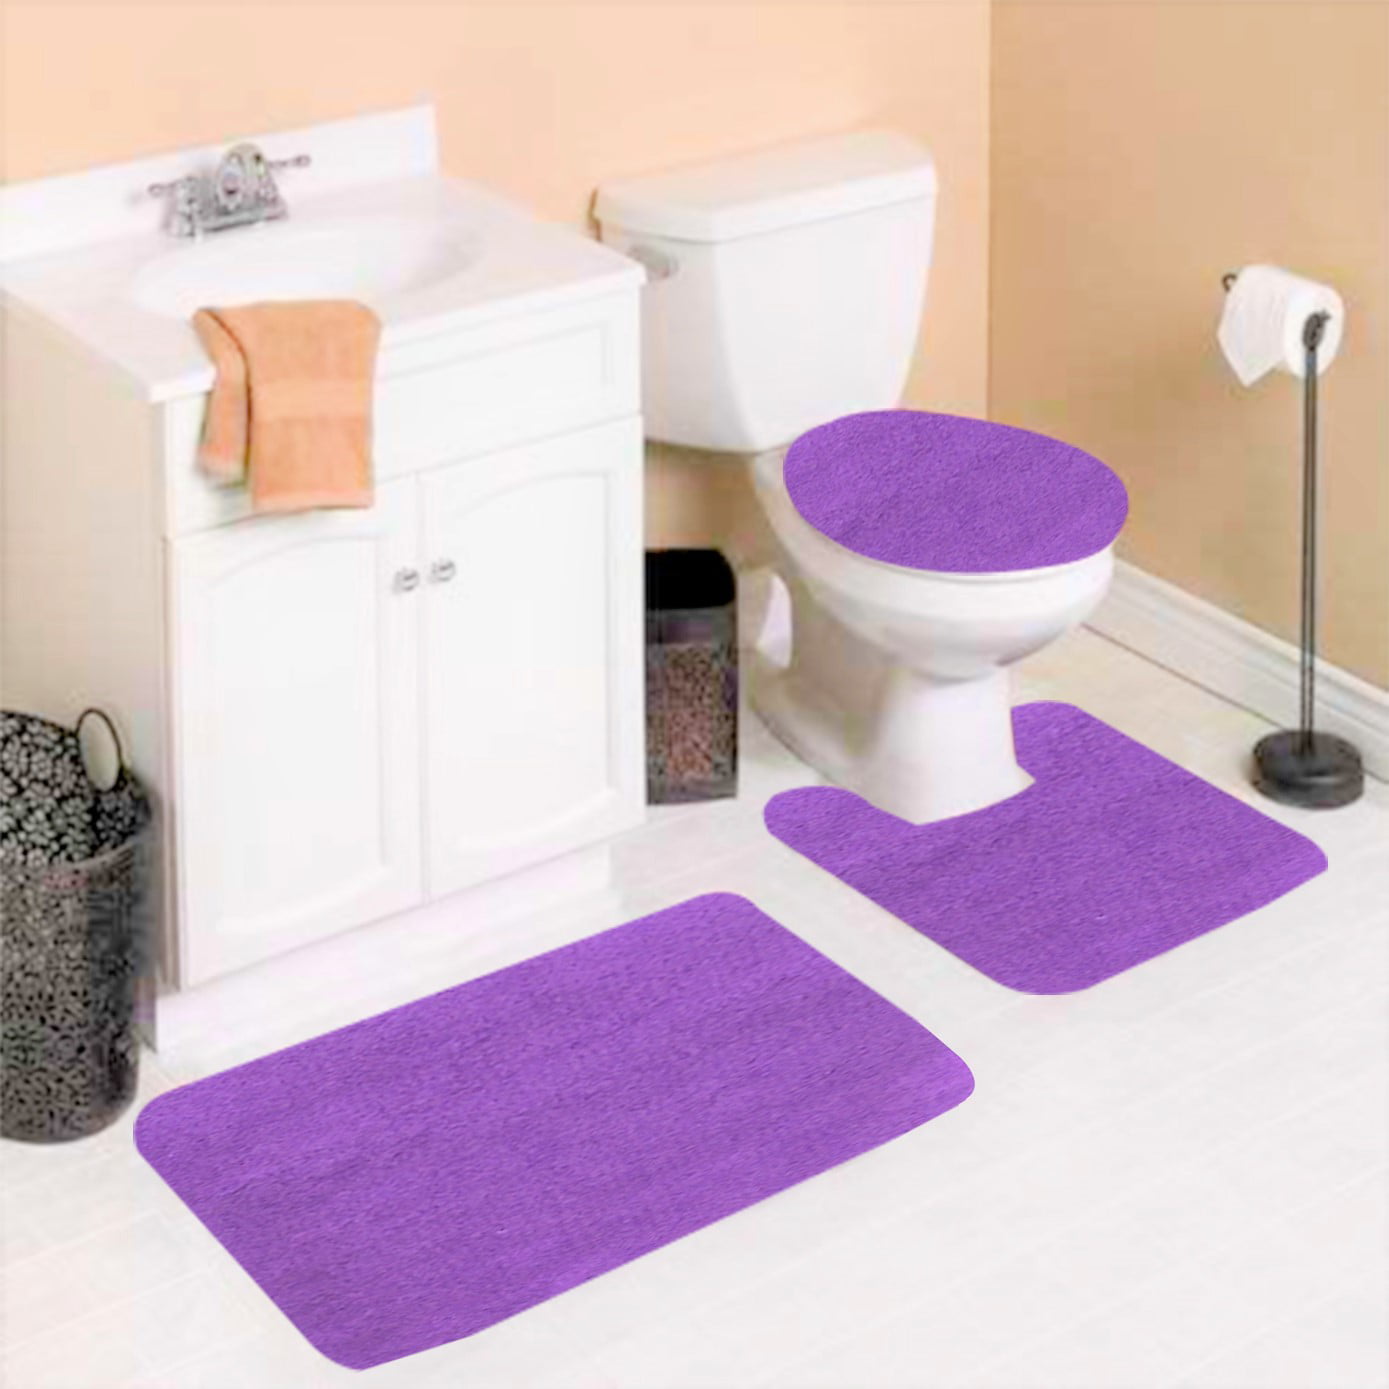 Toilet Seat Cover Set Non-Slip Bathroom Rug Toilet Seat Lid Cover Butterfly 